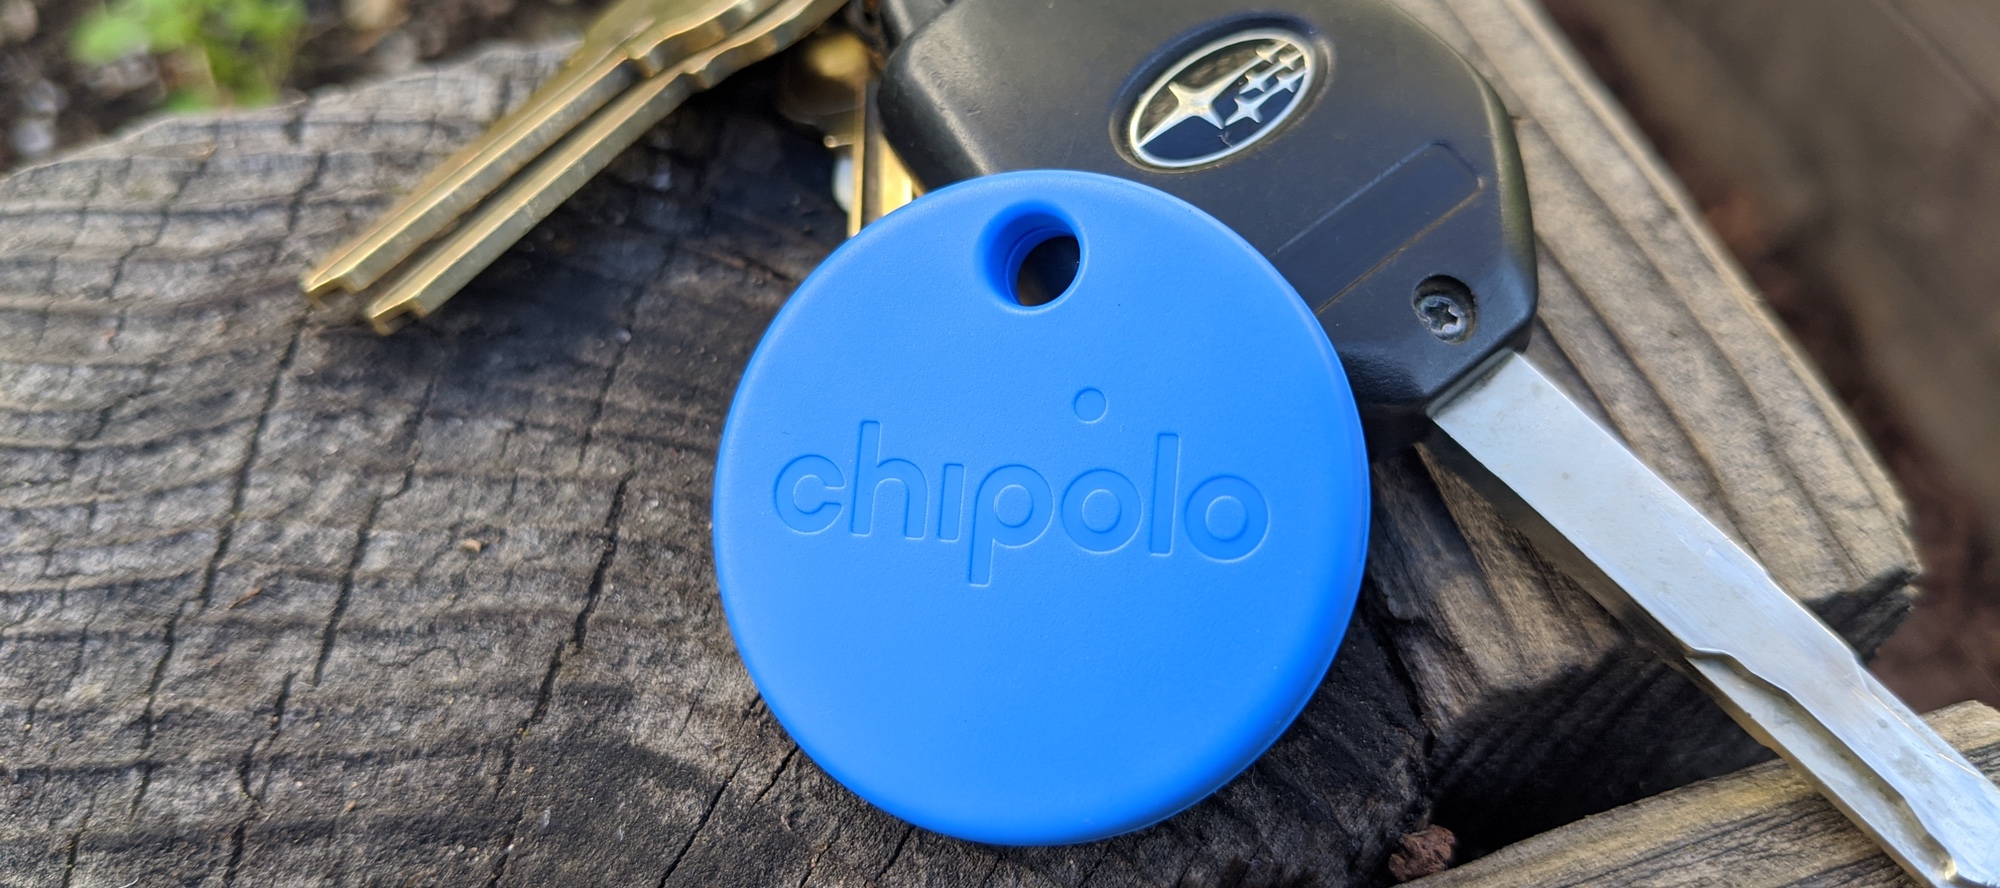 Chipolo One key finder review | Tom's Guide